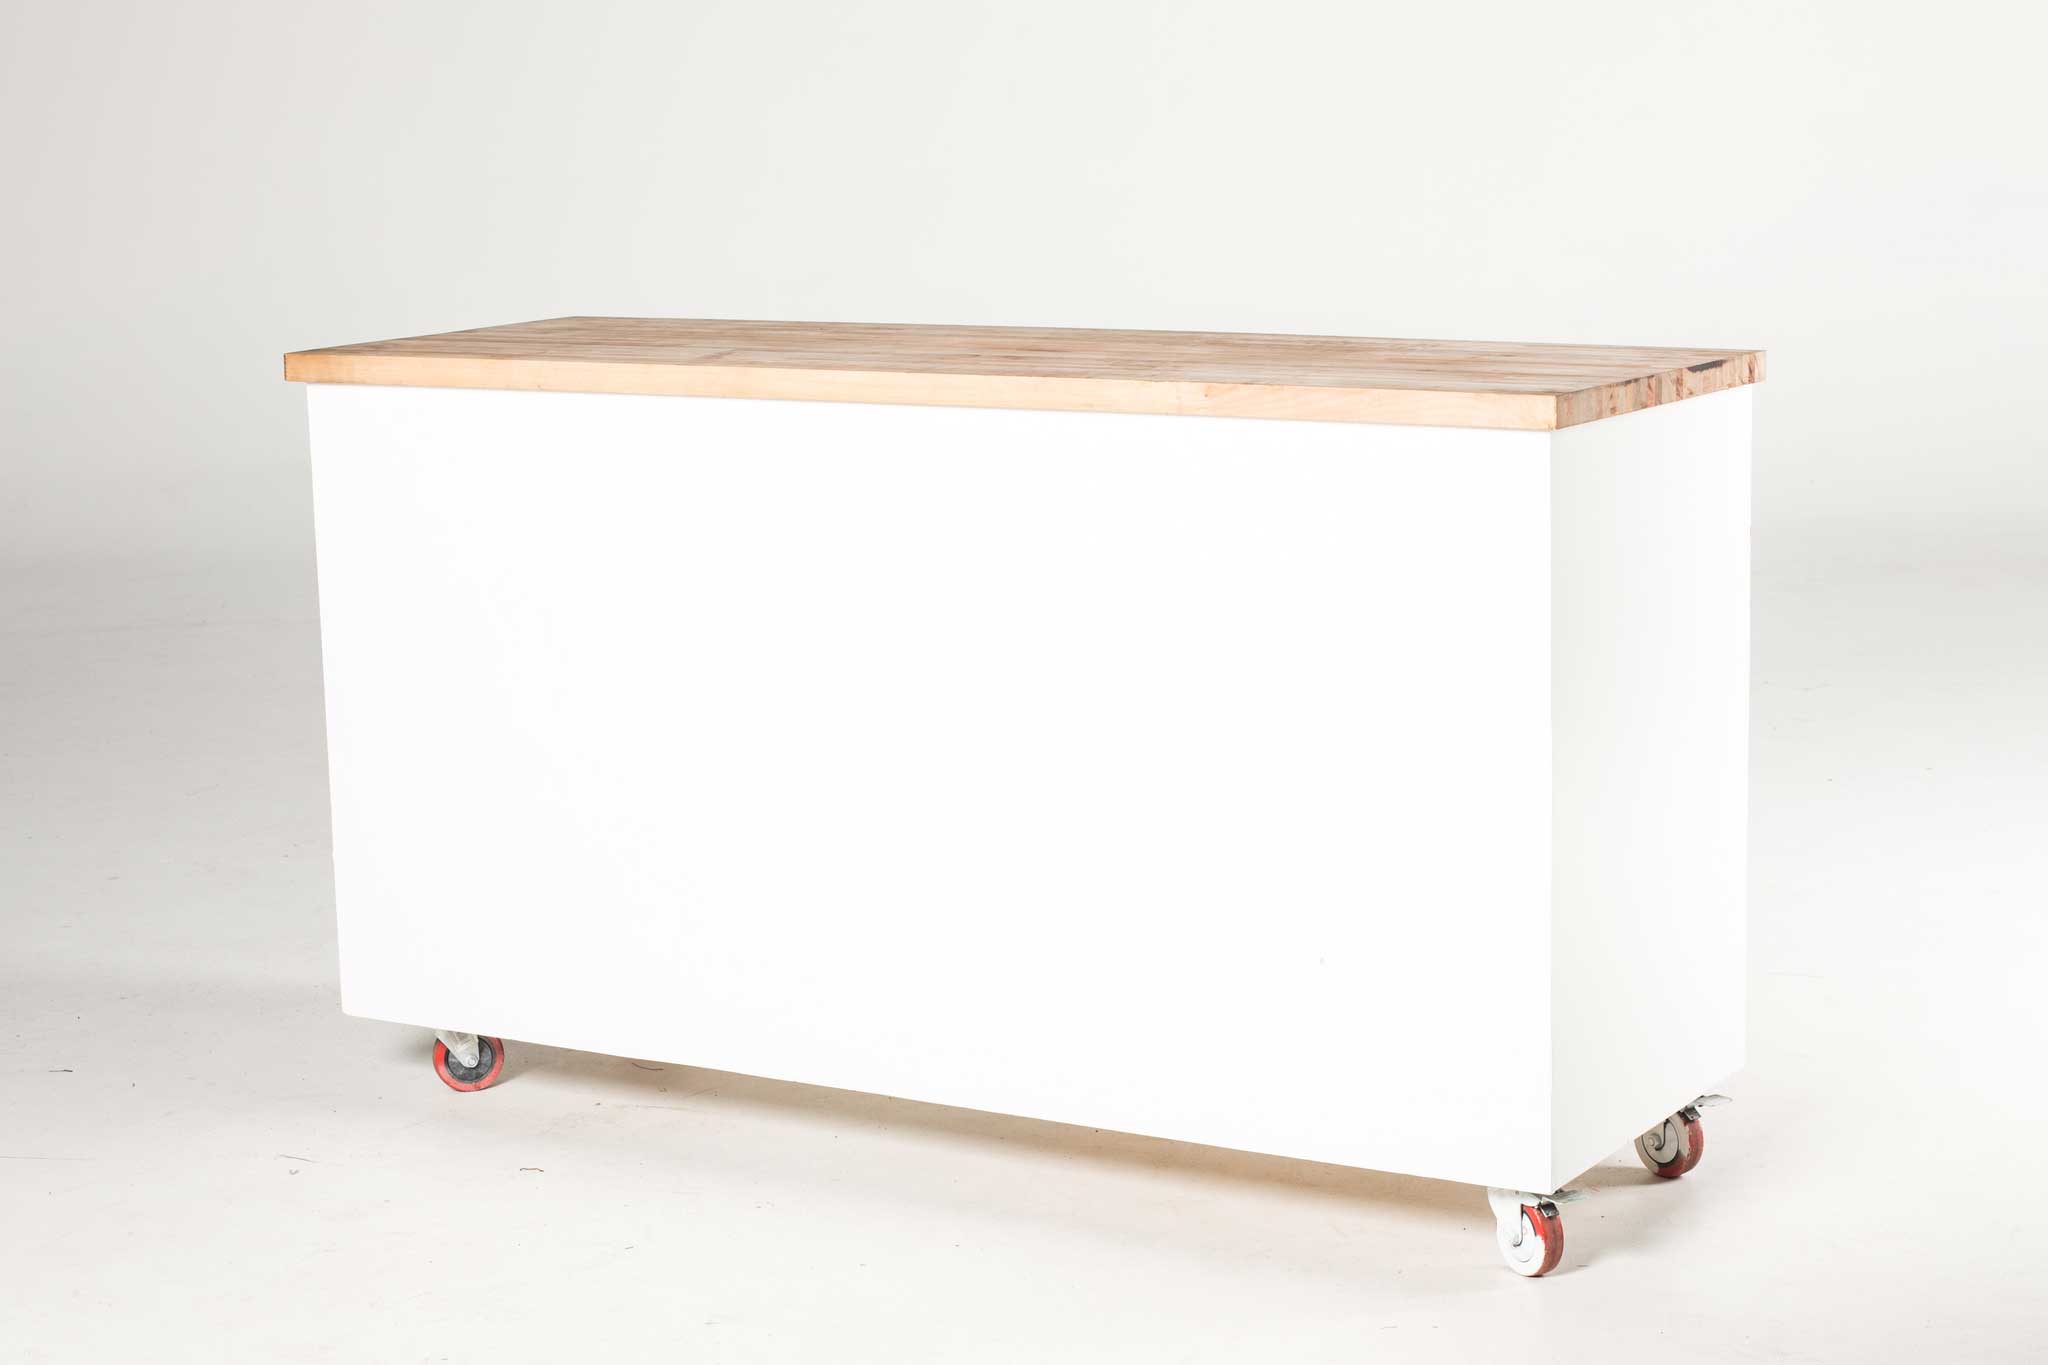 Picture of the white block bar rental on wheels.